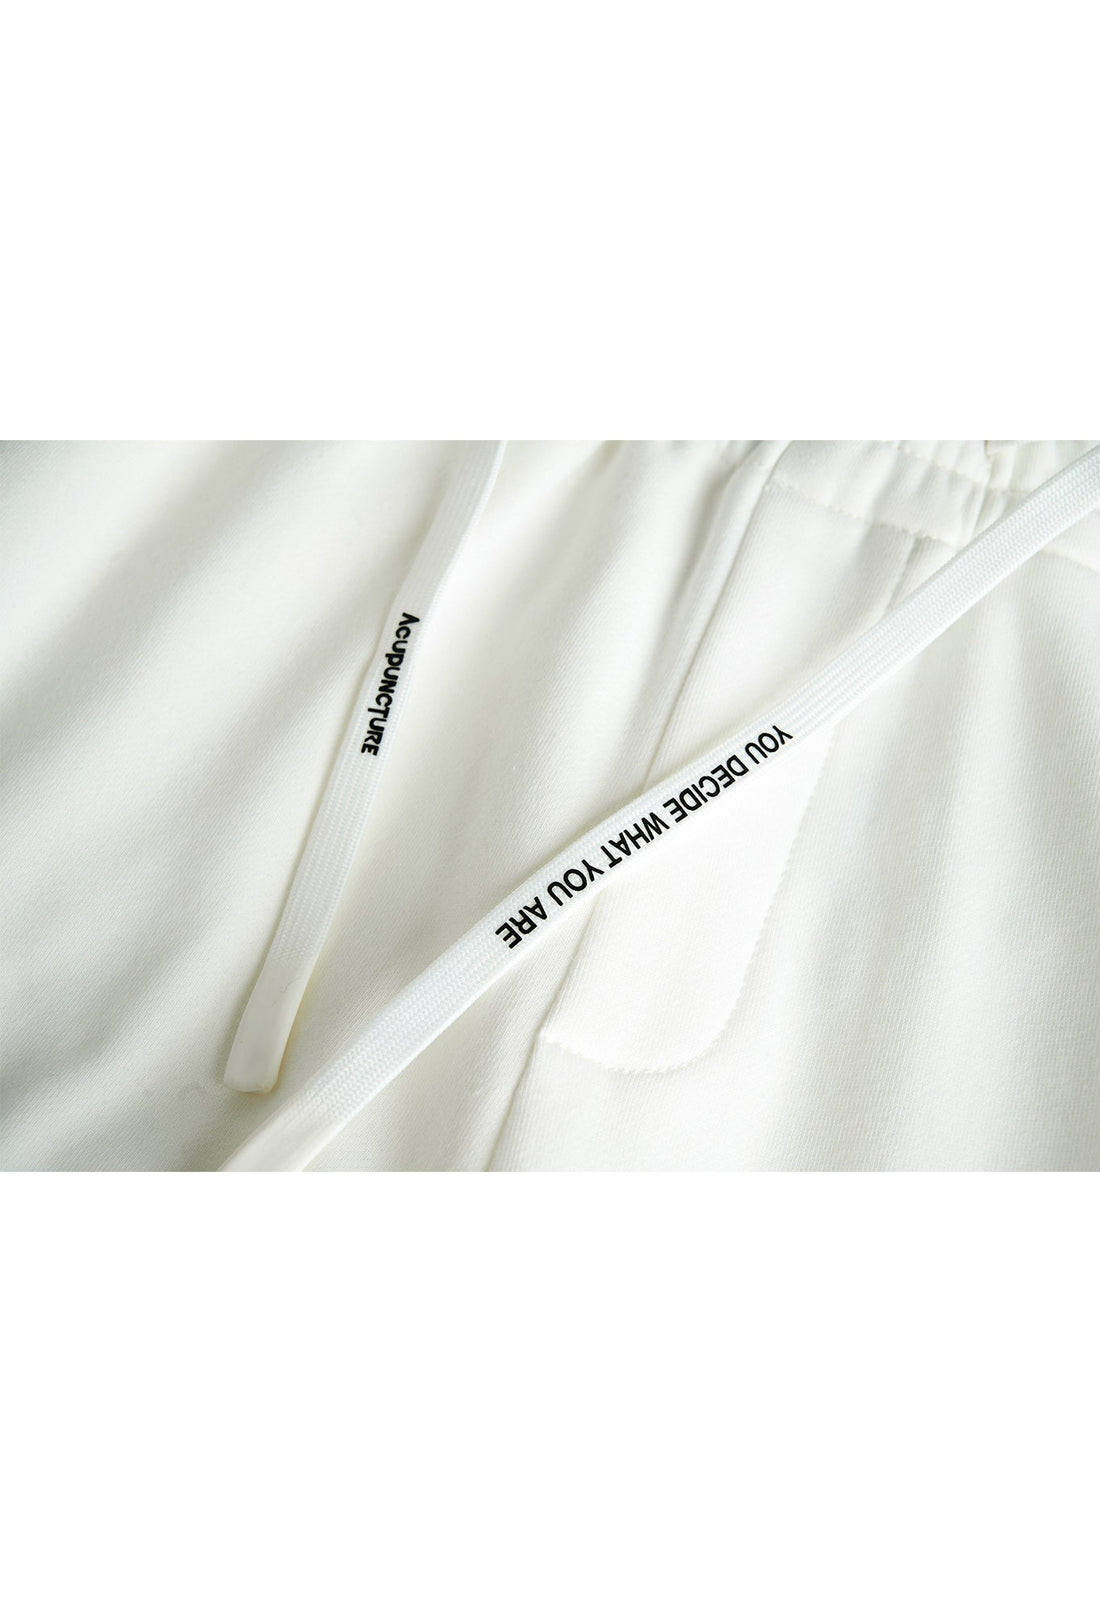 FLAMED LOGO PANTS WHITE Acupuncture